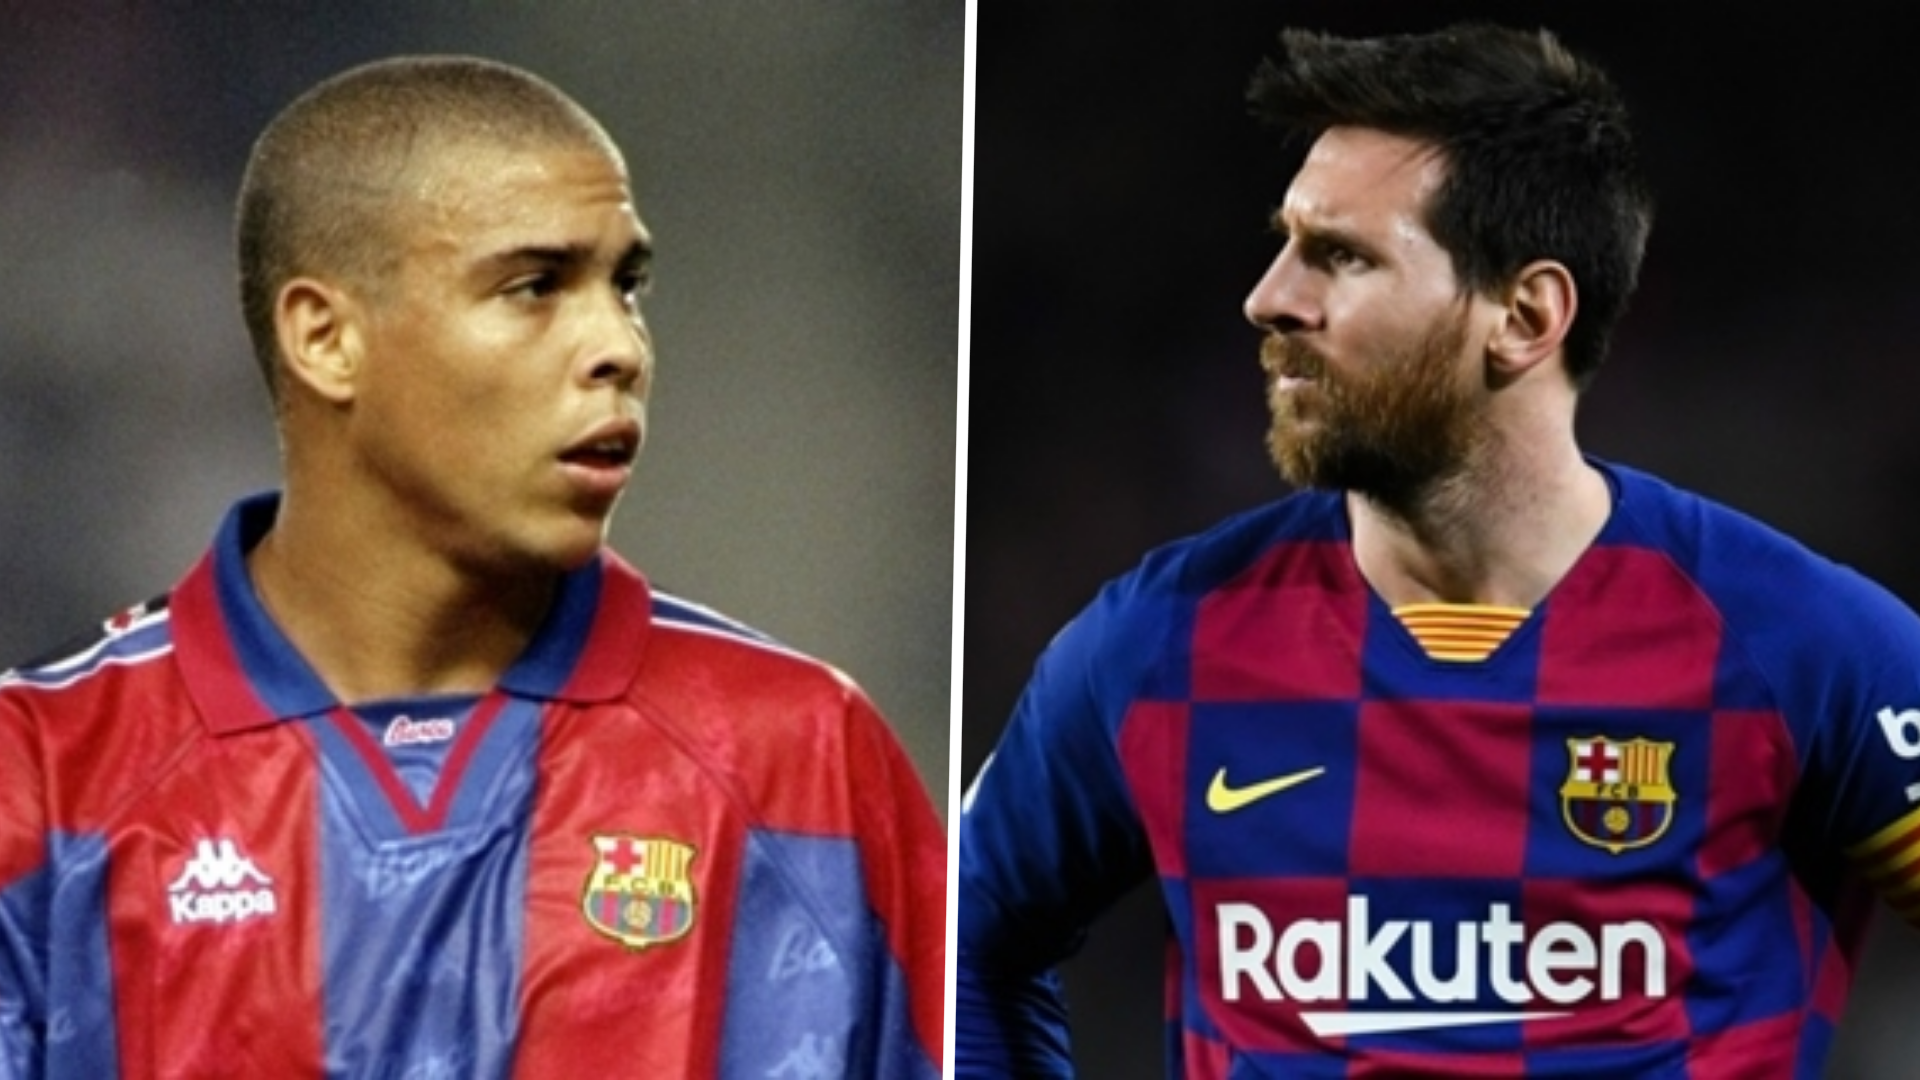 'Letting Messi leave is not the solution' - Ronaldo doubts striker's Barcelona departure